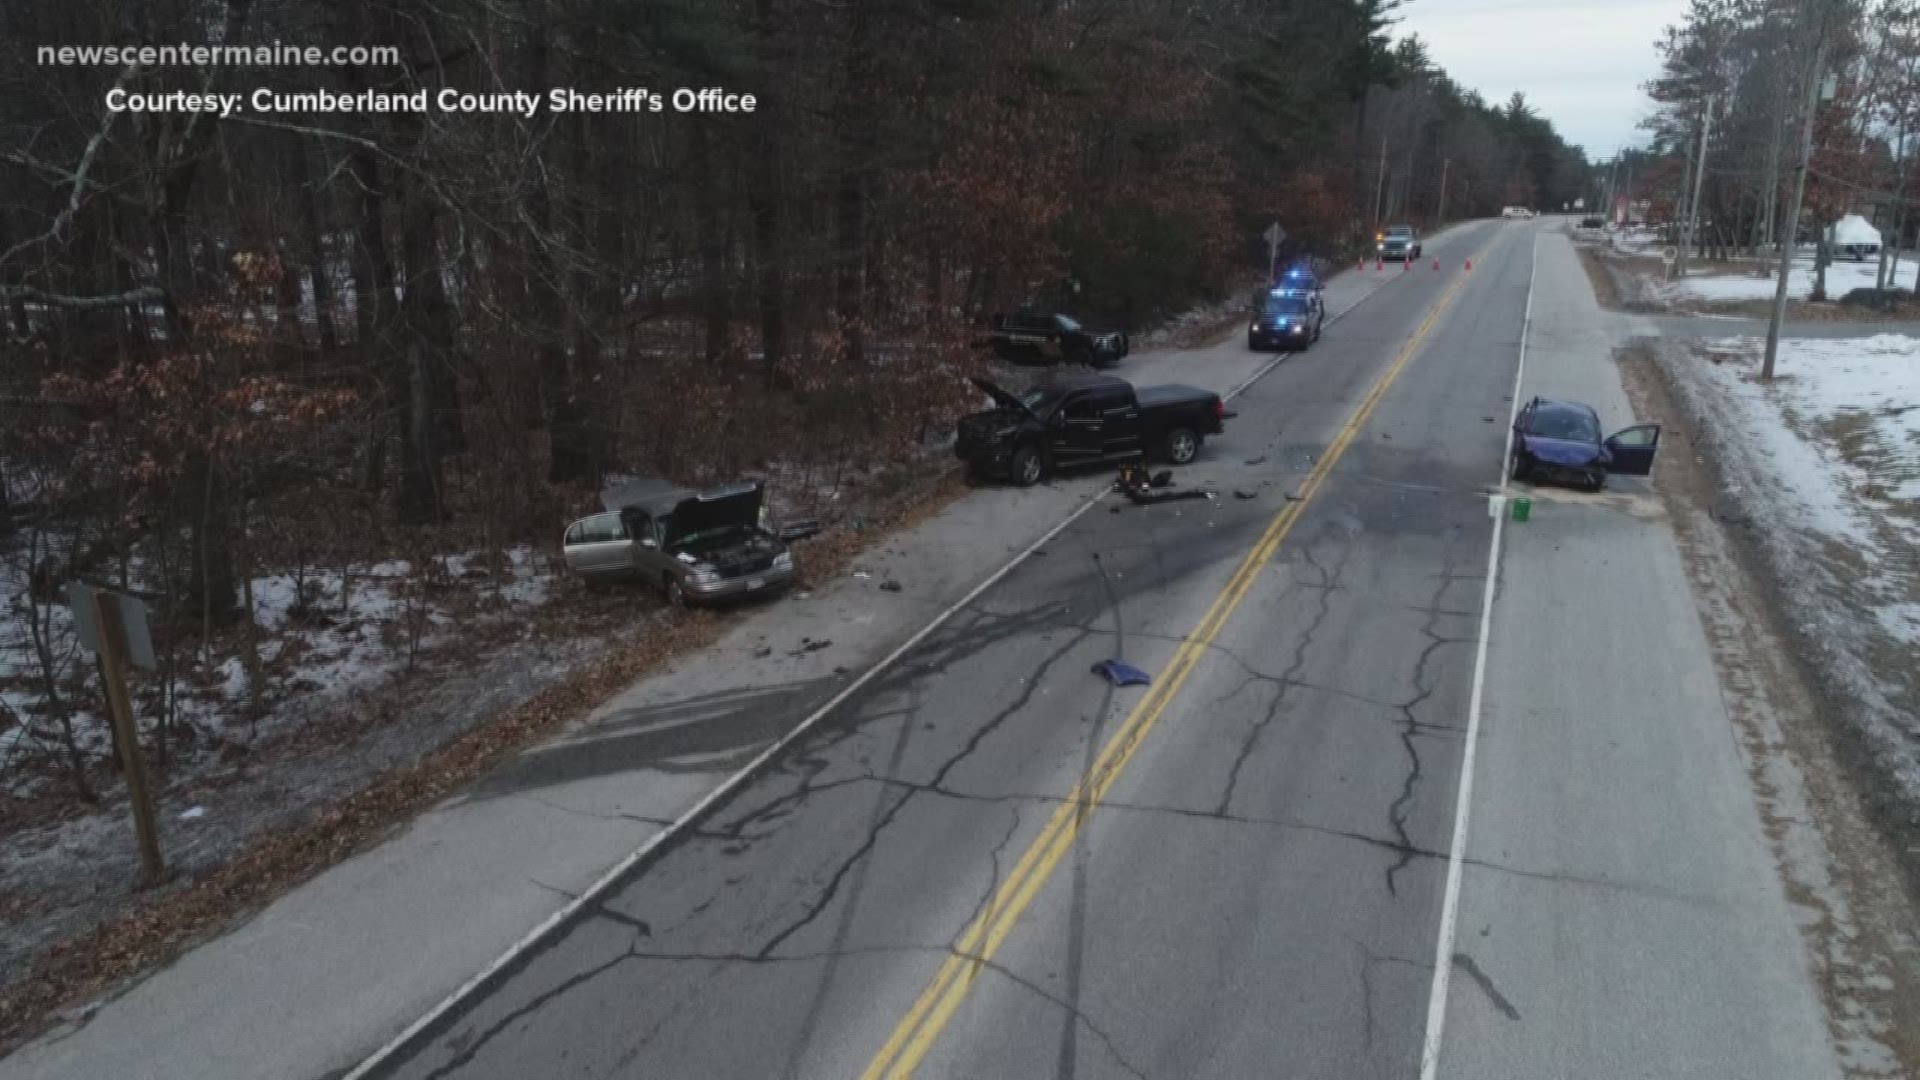 High-speed pursuit on Route 302 ends in crash